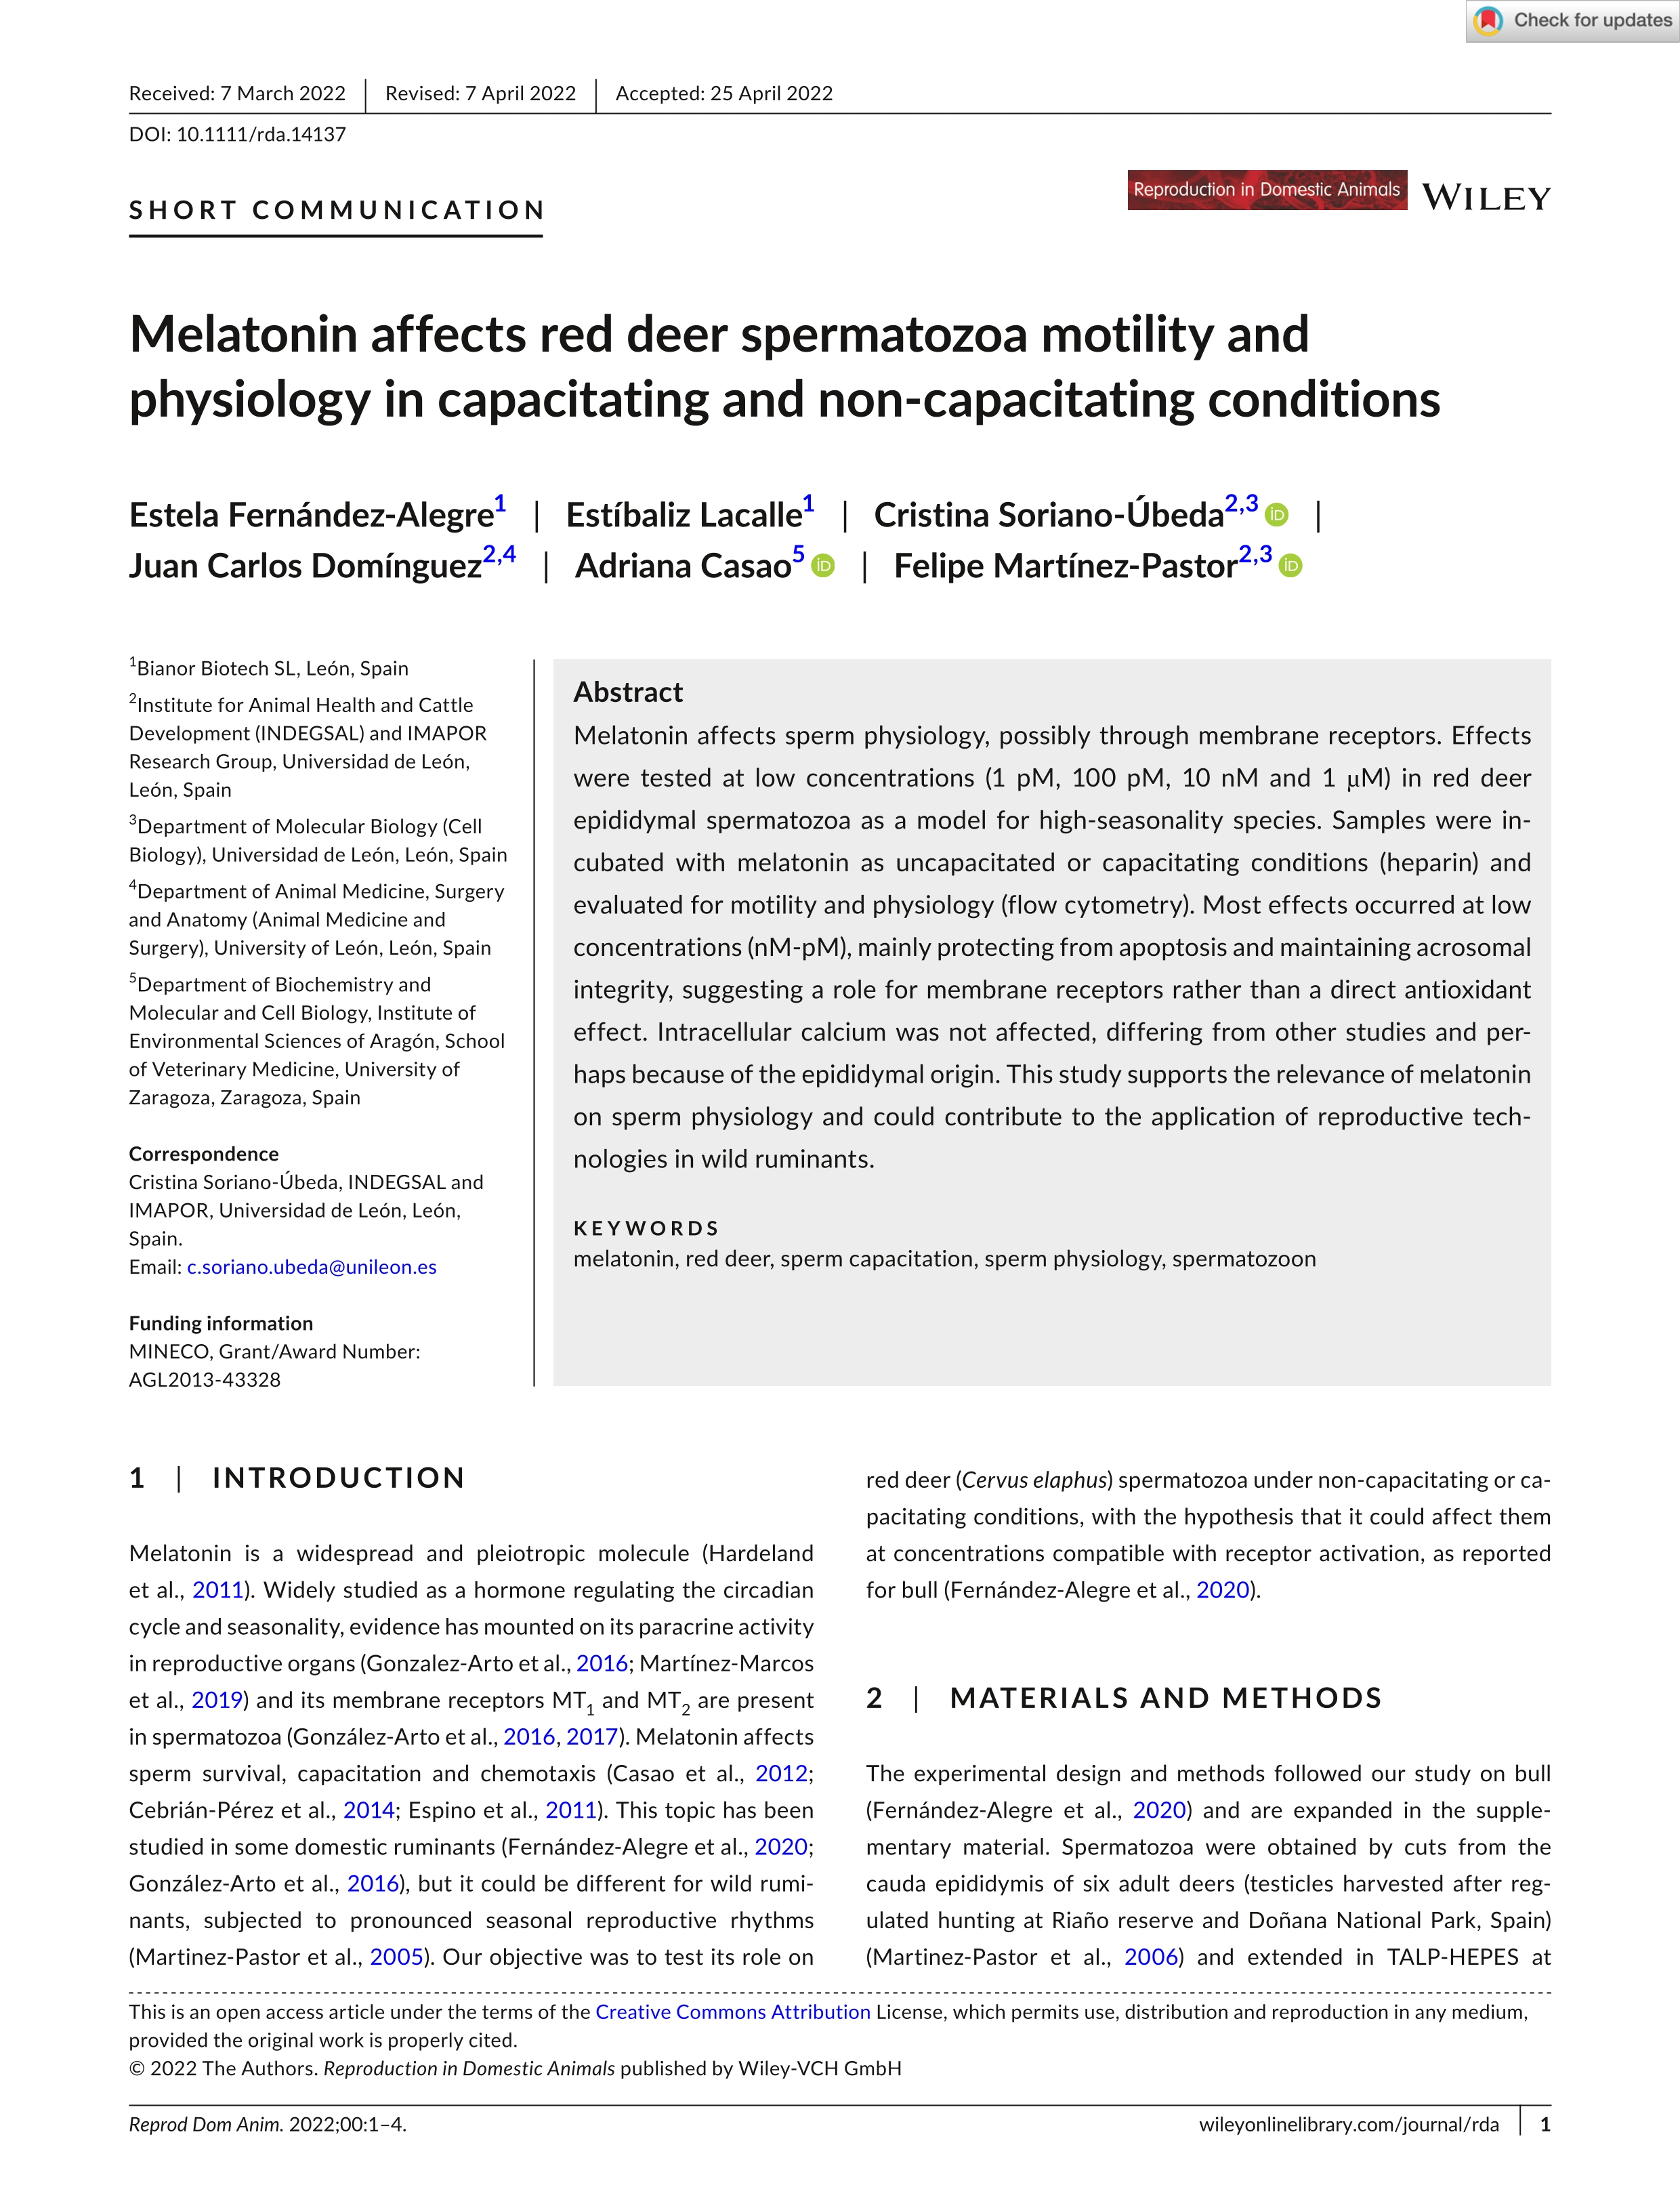 Melatonin affects red deer spermatozoa motility and physiology in capacitating and non-capacitating conditions